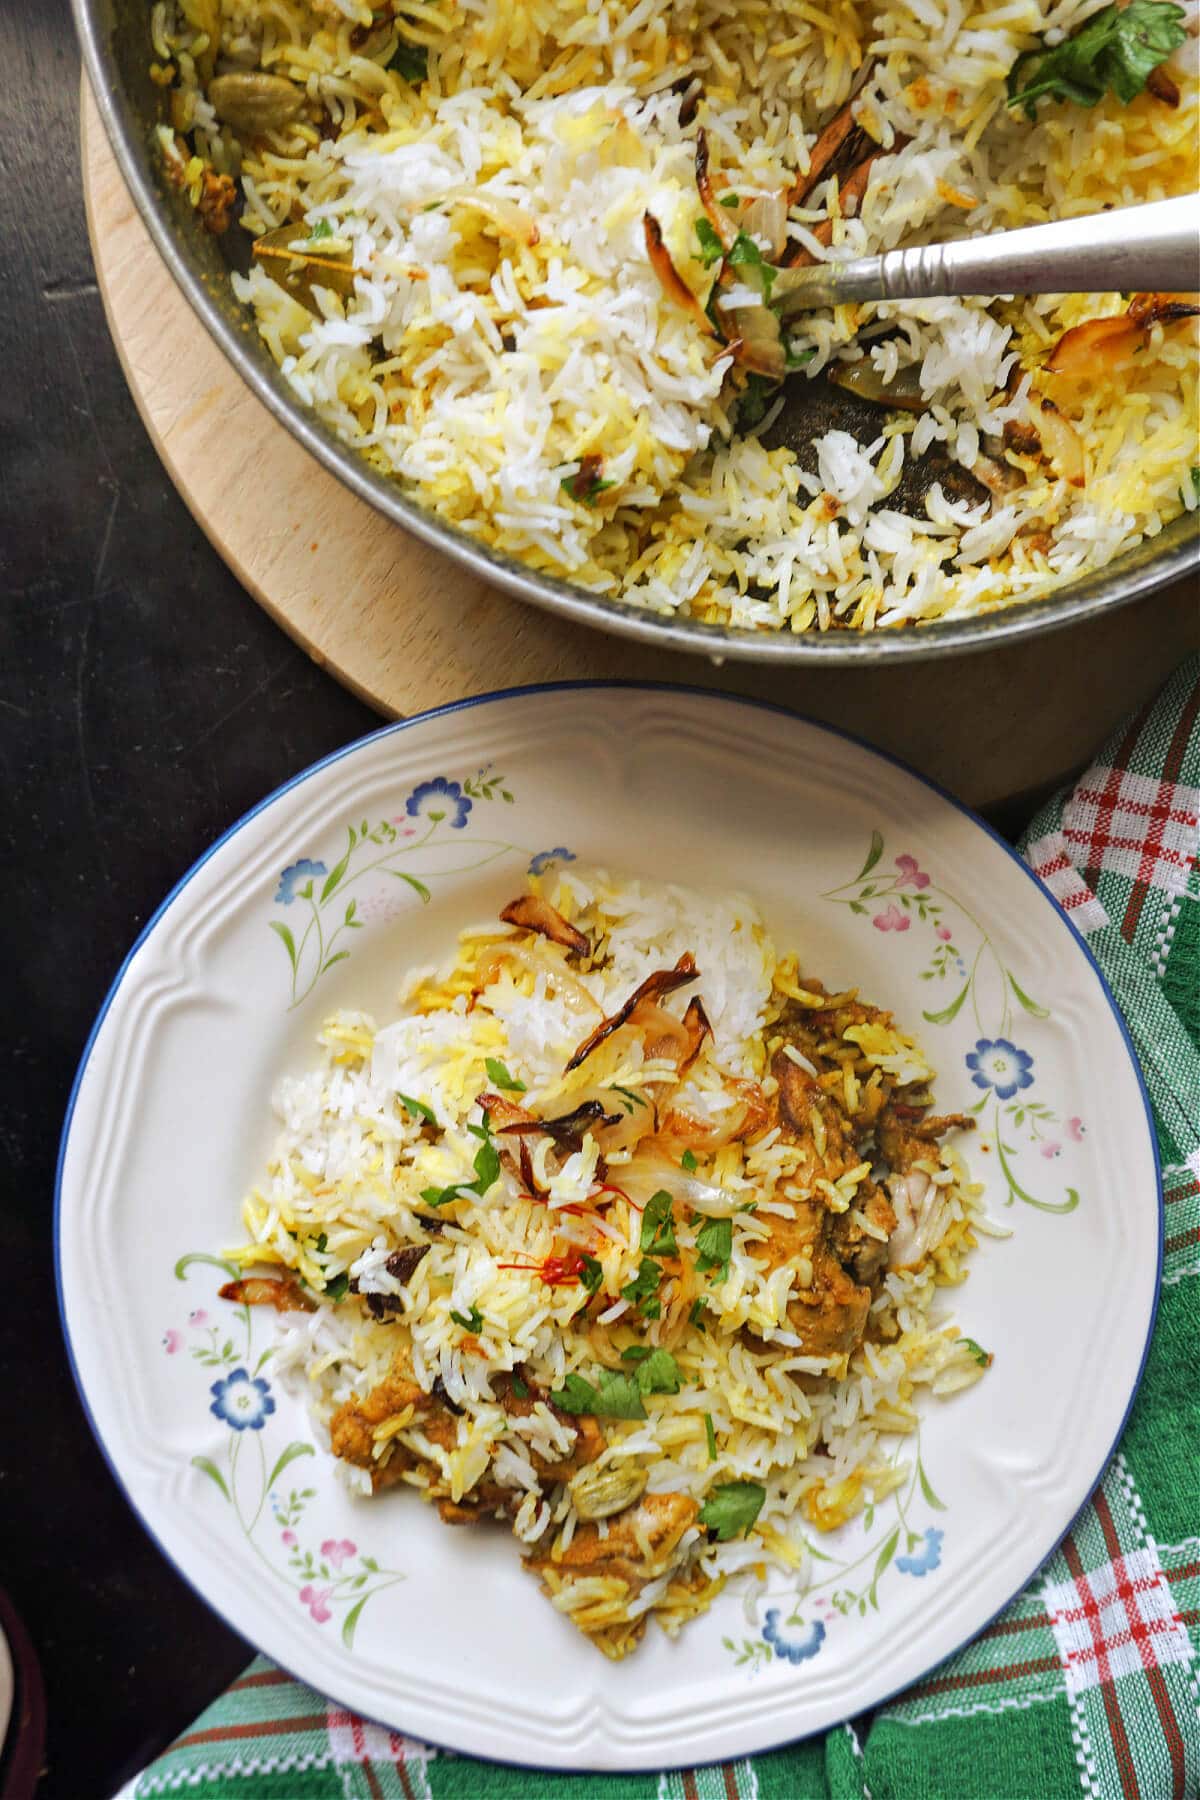 A plate with biryani and a pan with more of the dish.